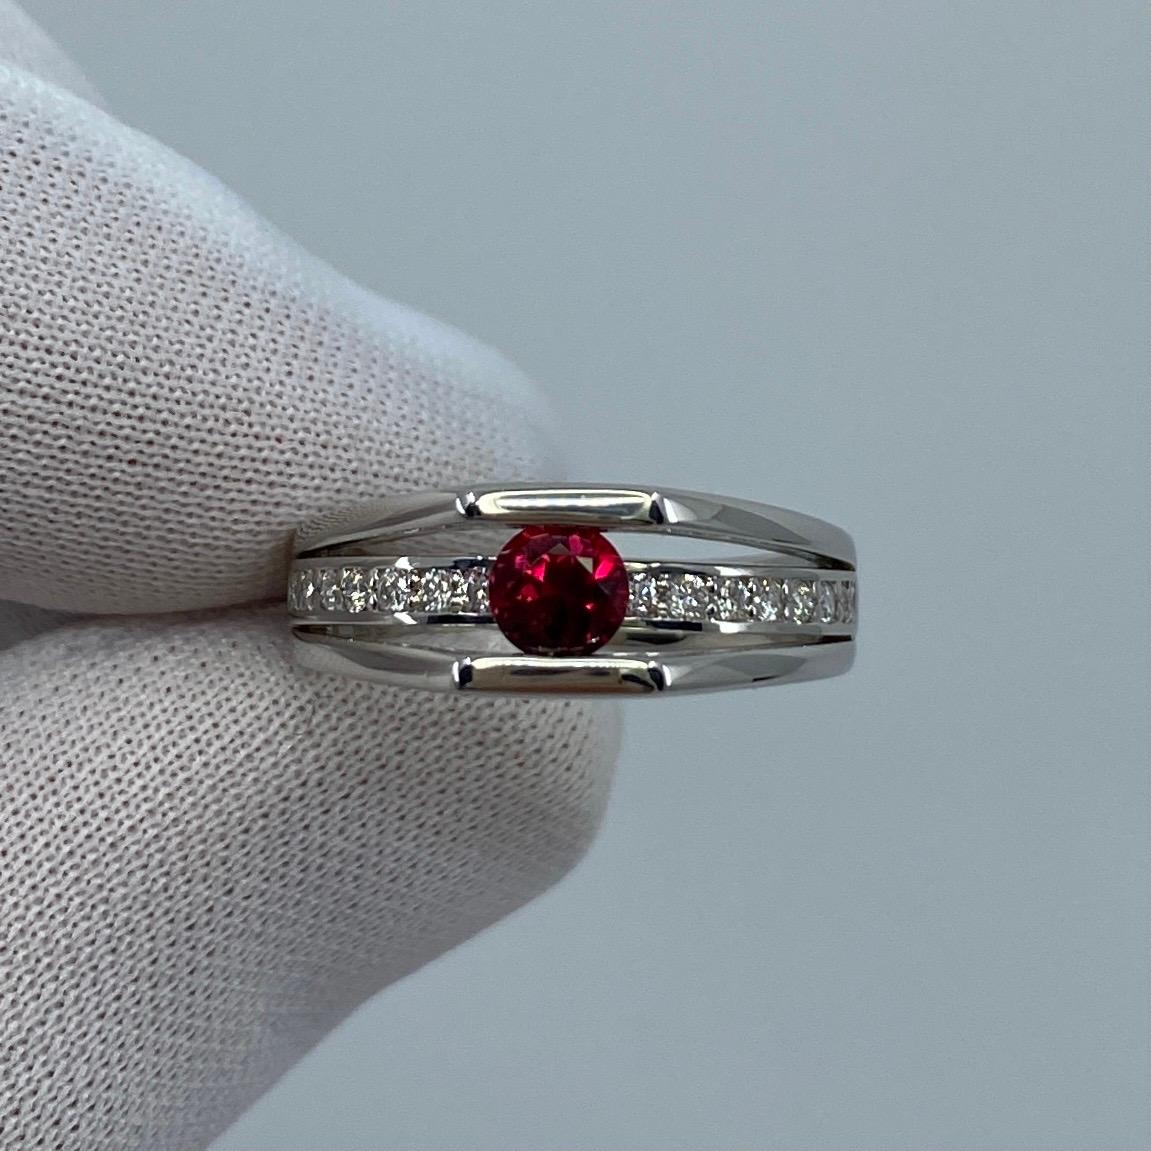 Untreated Ruby & Diamond Platinum Modern Ring.

0.47 Carat ruby with a fine vivid deep red colour. Certified by GIA confirming stone as untreated, very rare for natural rubies.
Also has an excellent round cut and excellent clarity, very clean